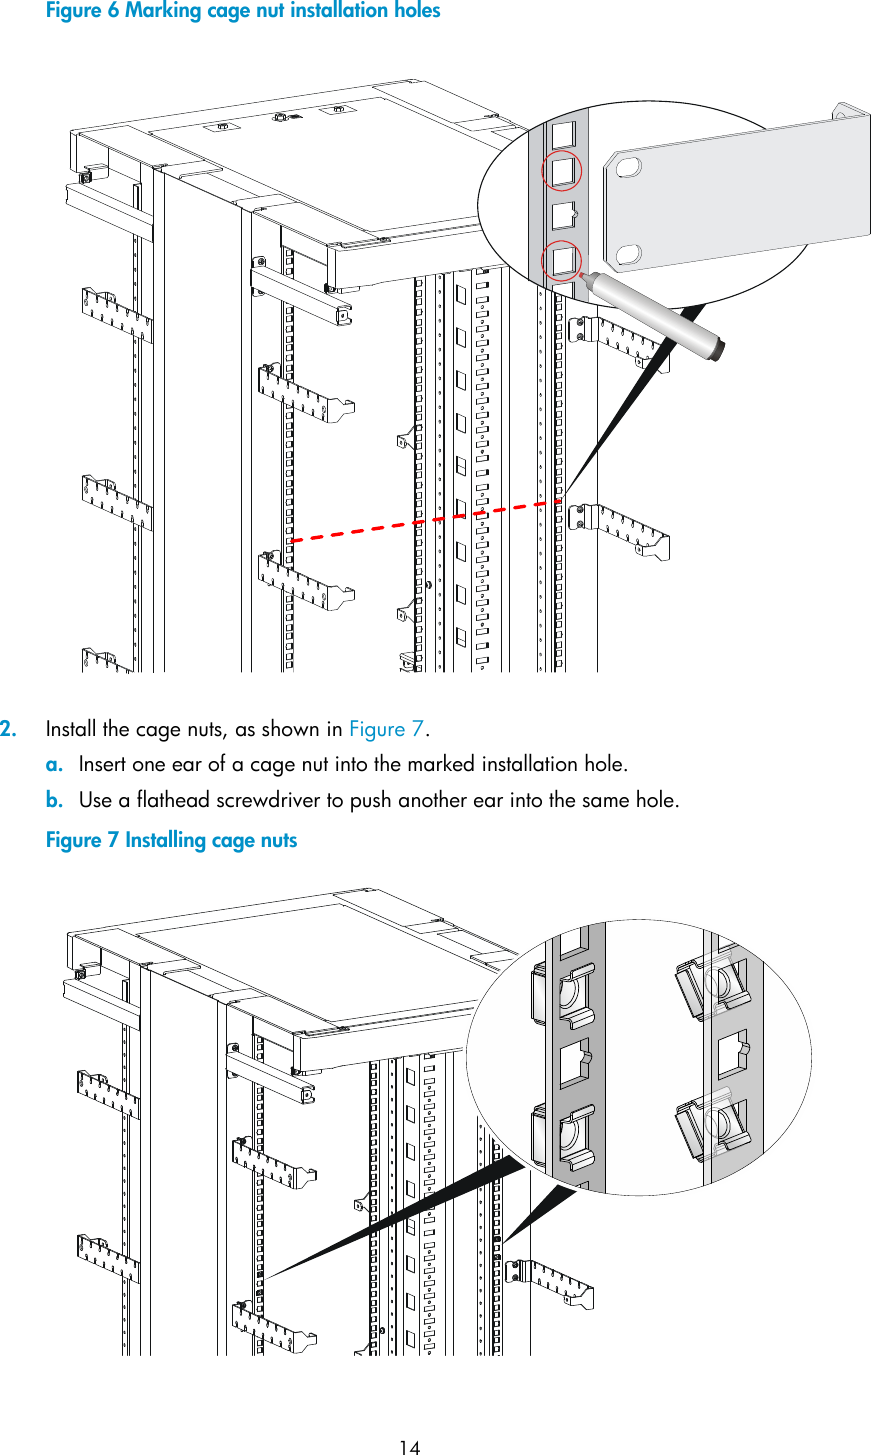  14 Figure 6 Marking cage nut installation holes   2. Install the cage nuts, as shown in Figure 7. a. Insert one ear of a cage nut into the marked installation hole. b. Use a flathead screwdriver to push another ear into the same hole. Figure 7 Installing cage nuts   